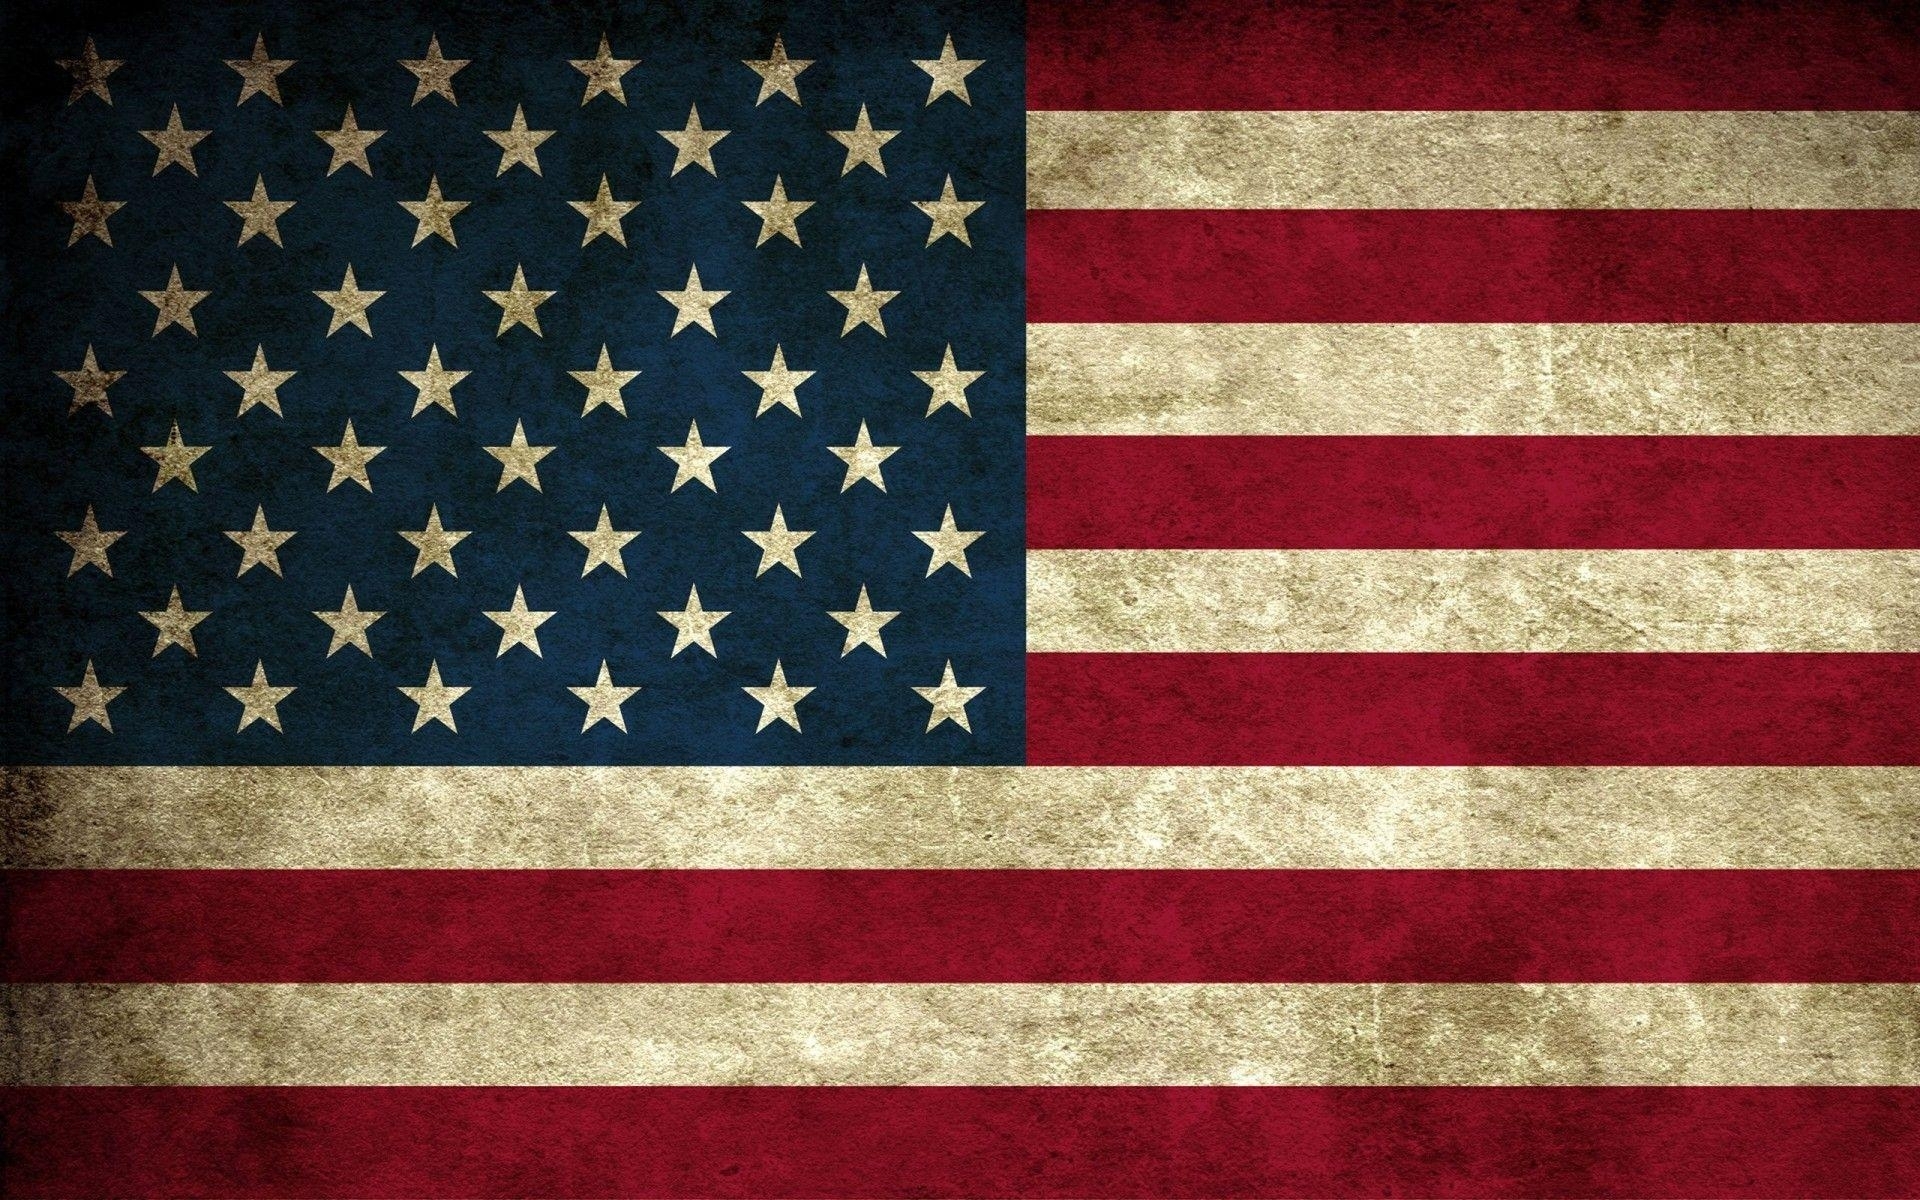 10 Top Worn American Flag Wallpaper FULL HD 1920×1080 For PC Background